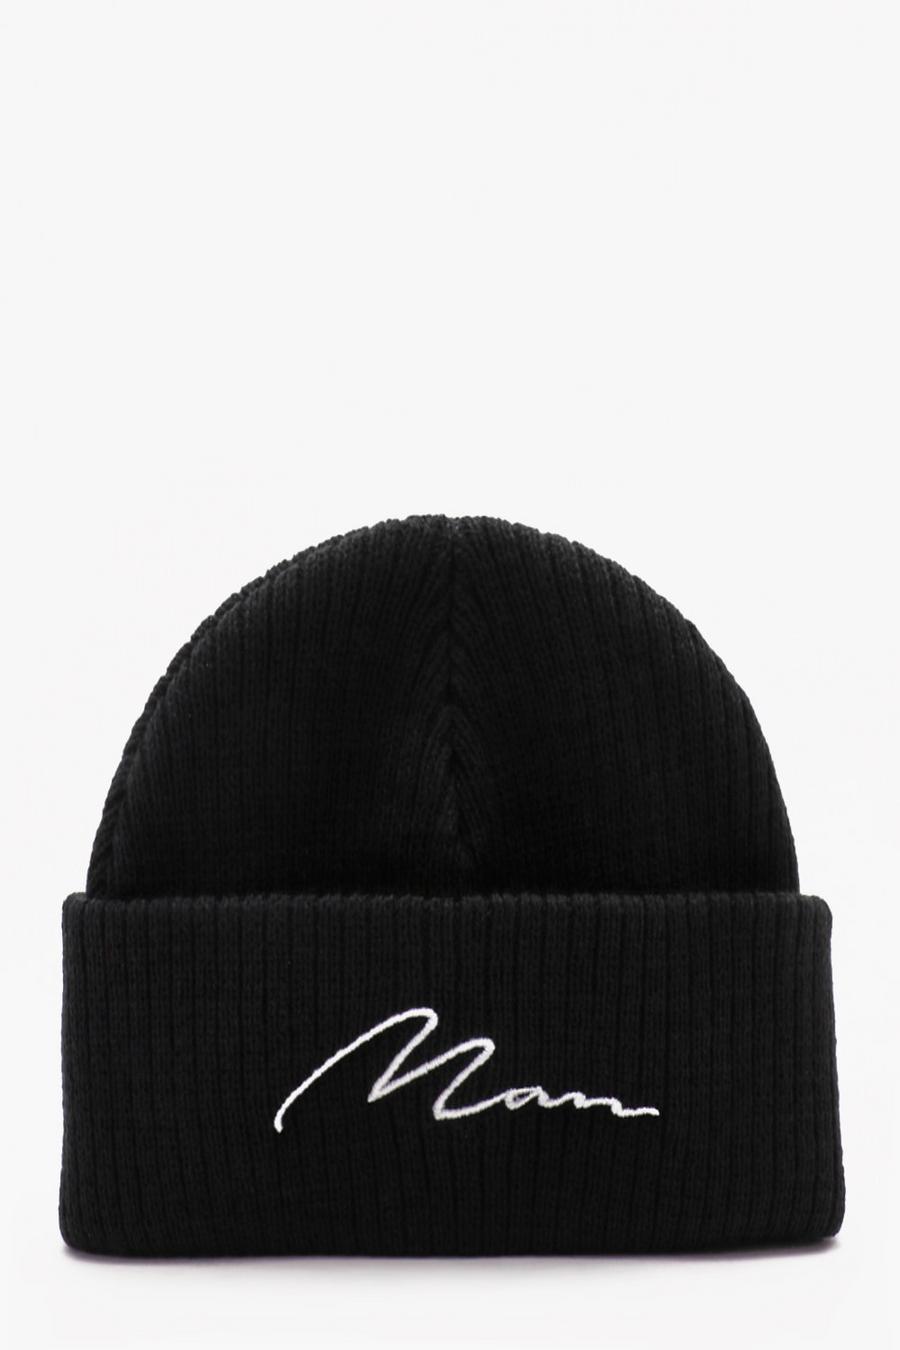 MAN Script Embroidered Micro Beanie image number 1